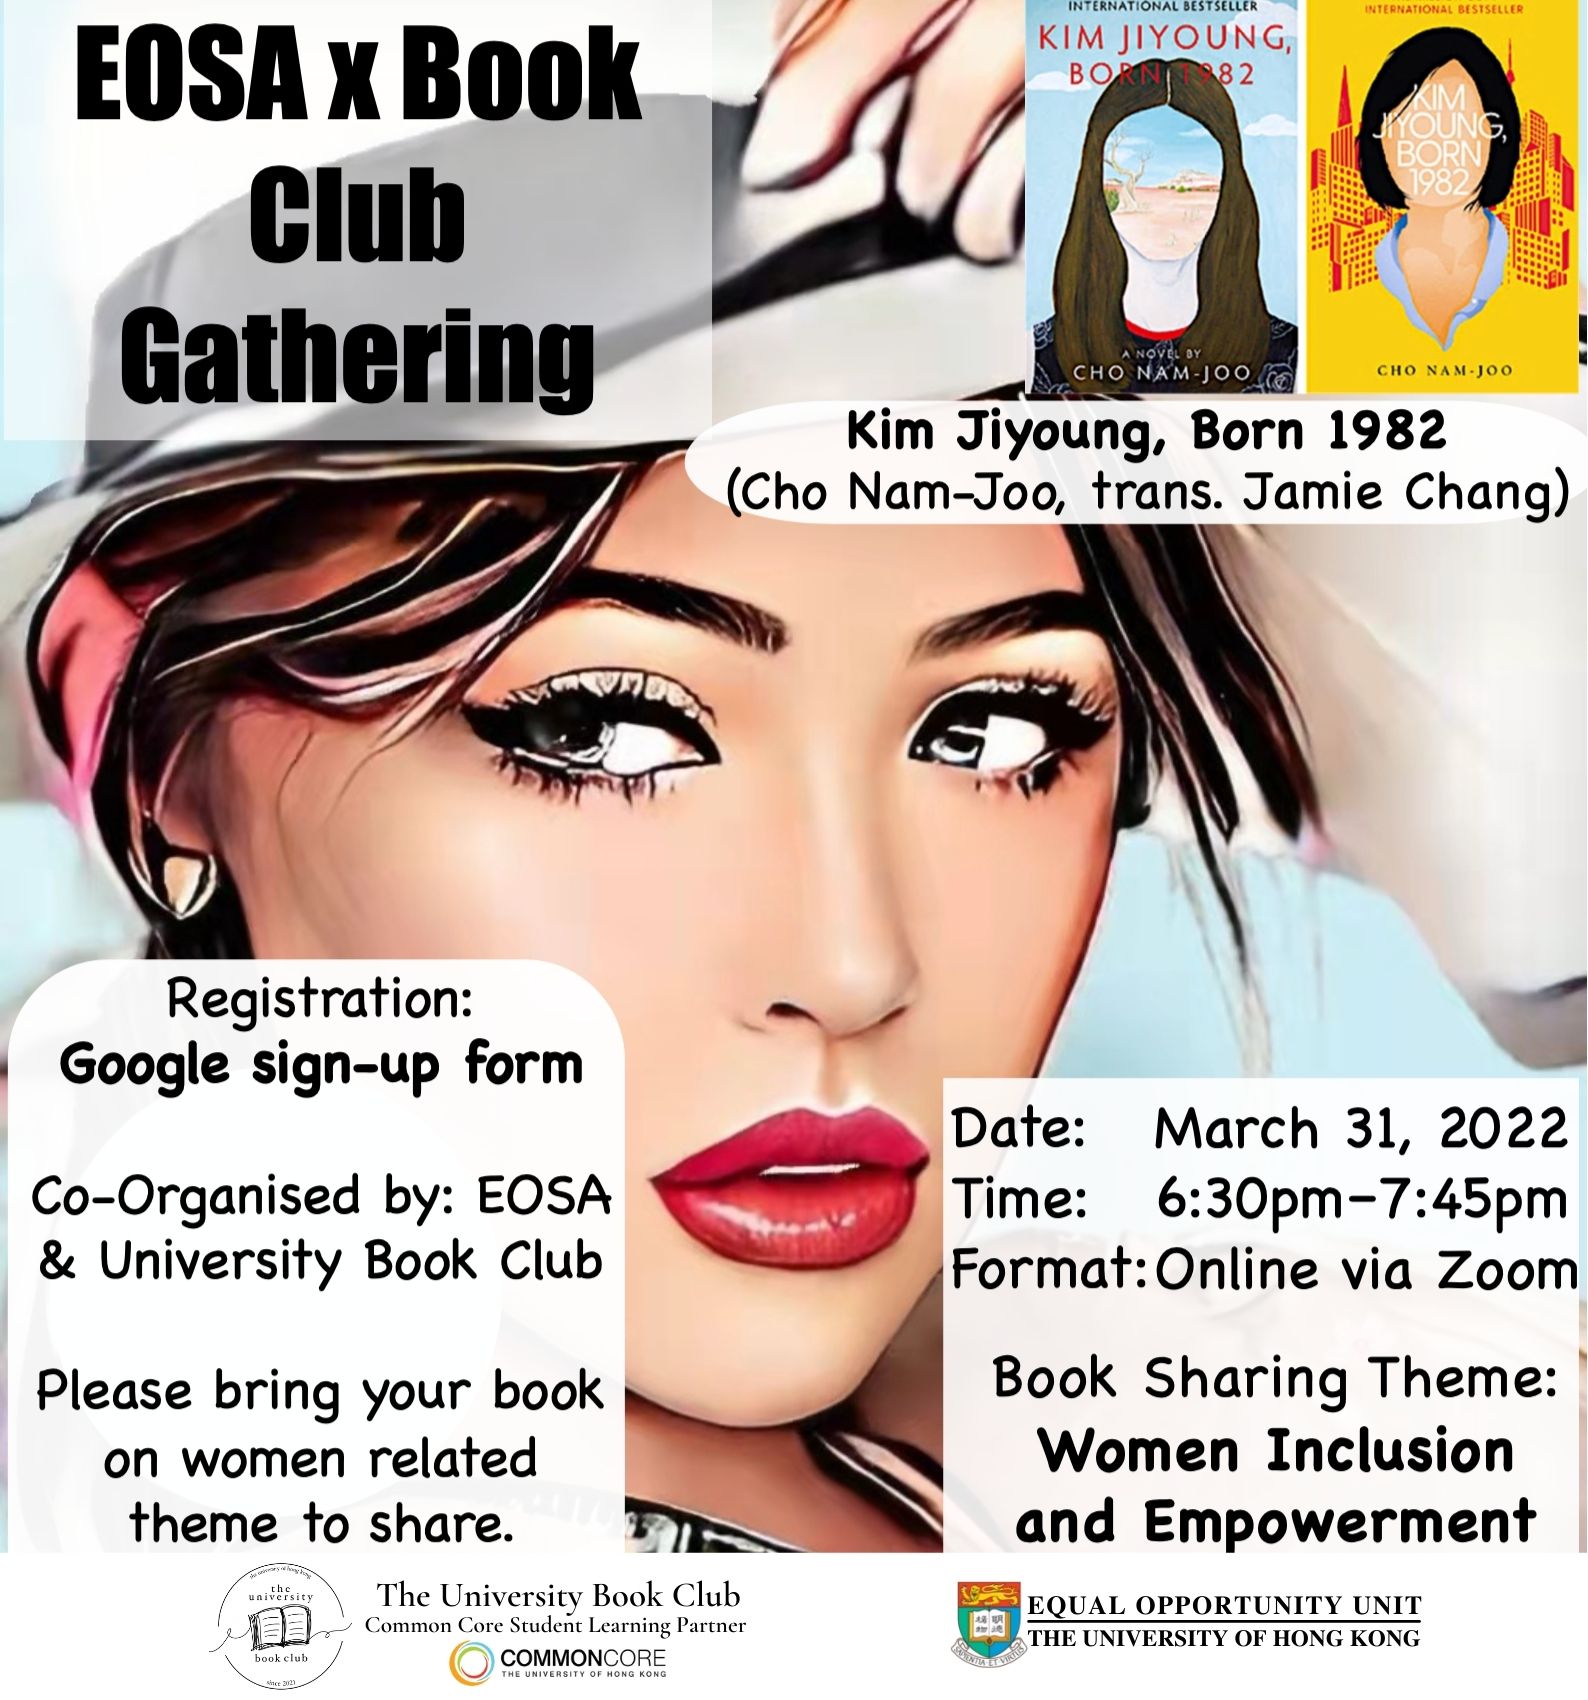 EOSA X Book Club Gathering Event Poster: Content same as text